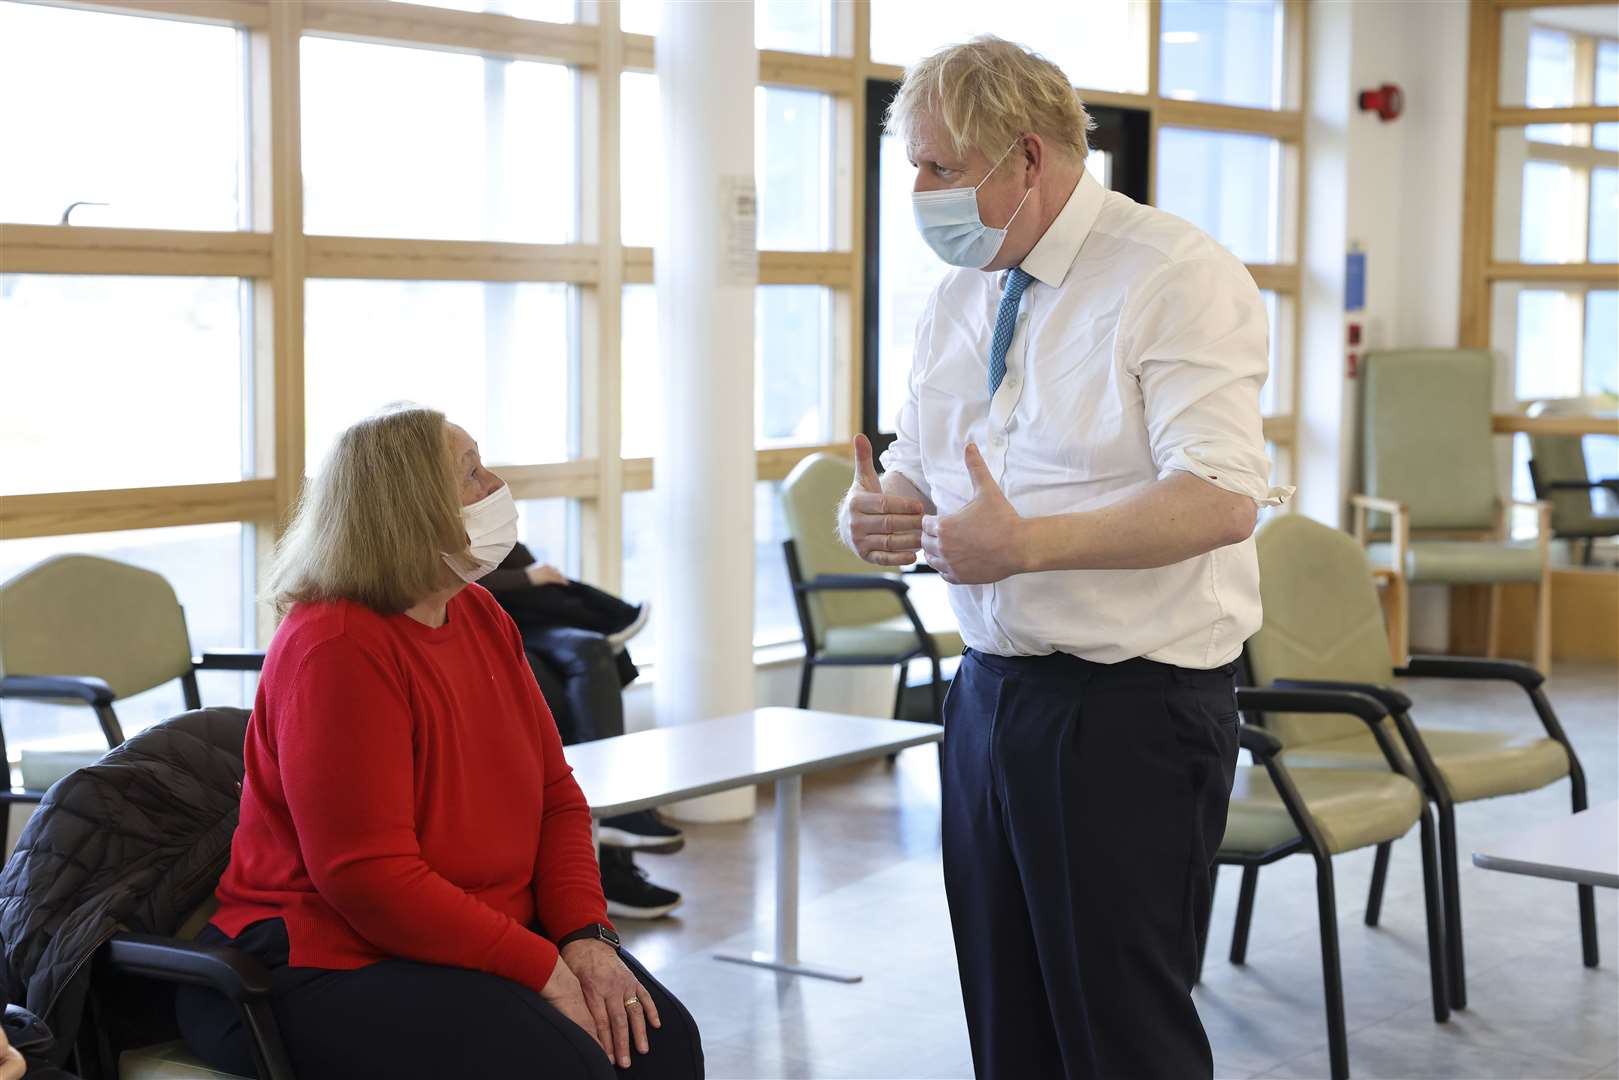 Boris Johnson talks to a woman in the waiting area of the Kent Oncology Centre, Maidstone. Picture: Andrew Parsons / No 10 Downing Street